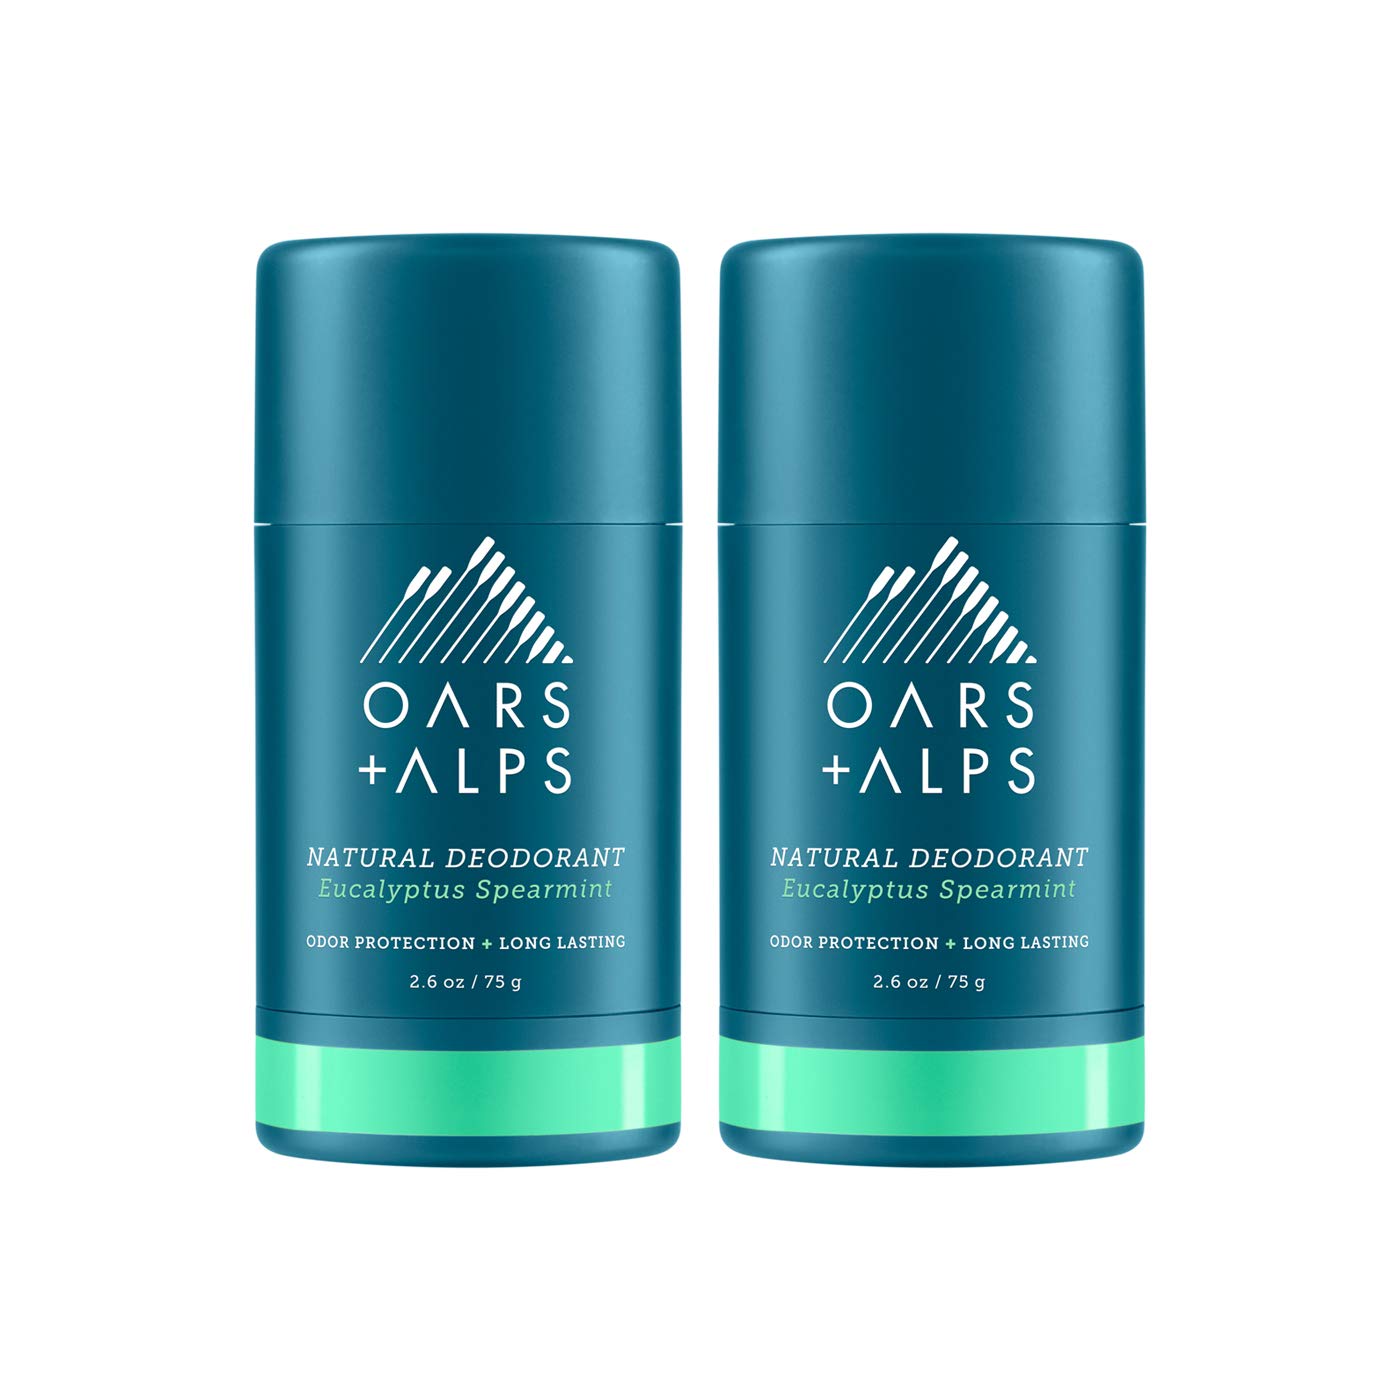 Oars + Alps Aluminum Free Deodorant for Men and Women, Dermatologist Tested and Made with Clean Ingredients, Travel Size, Eucalyptus Spearmint, 2 Pack, 2.6 Oz Each